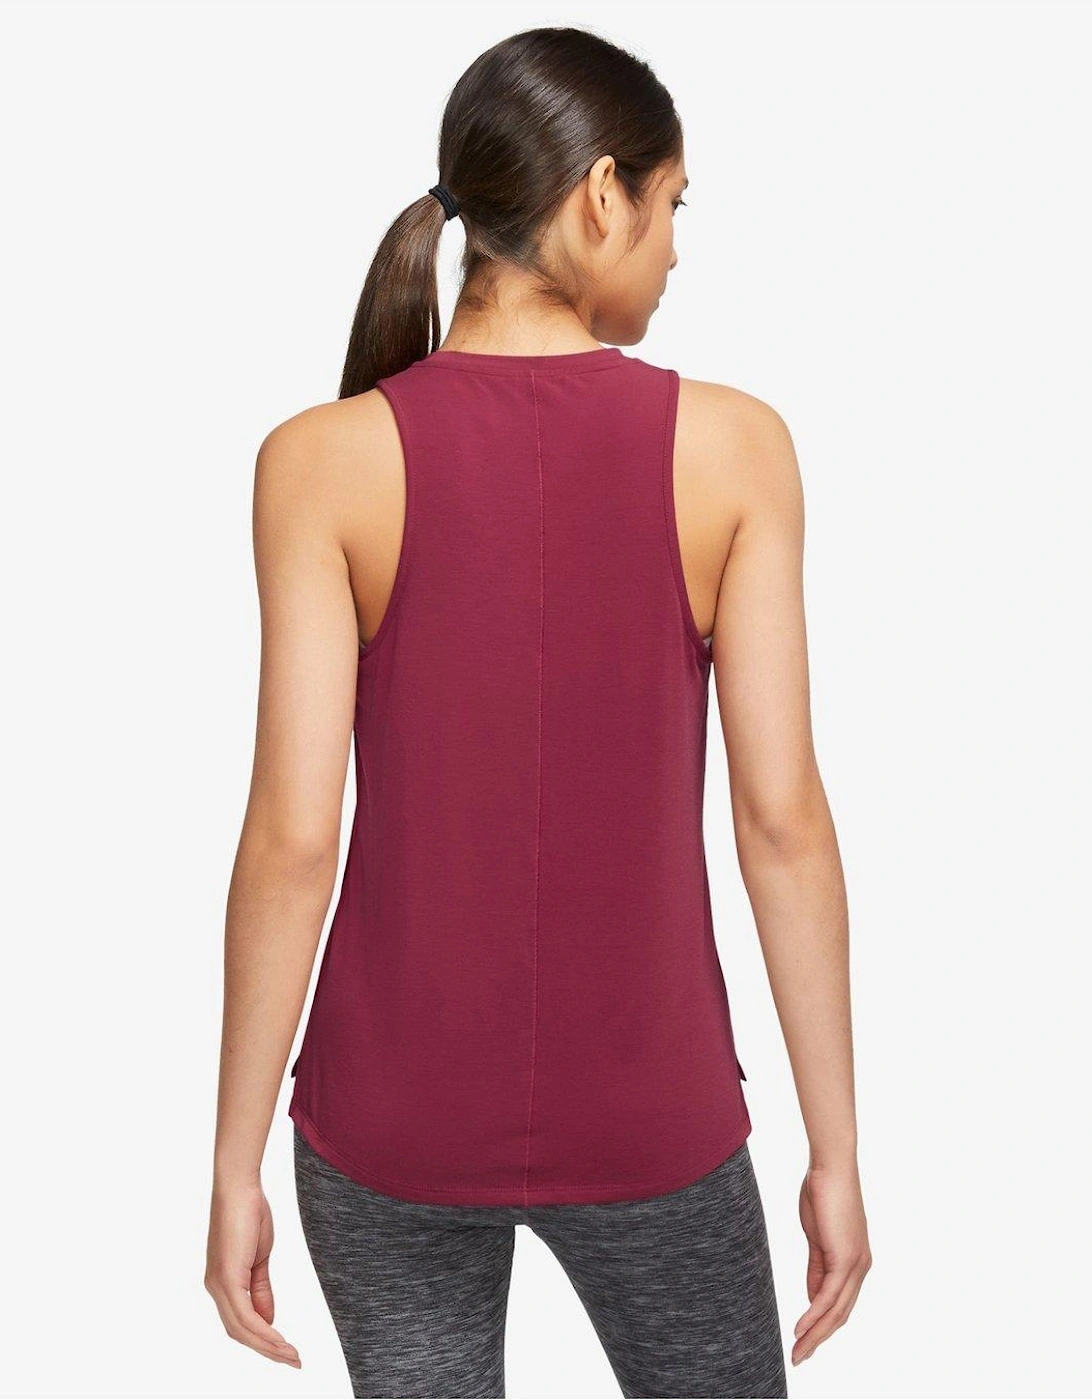 Dri-FIT One Luxe Women's Standard Fit Tank Top - Red